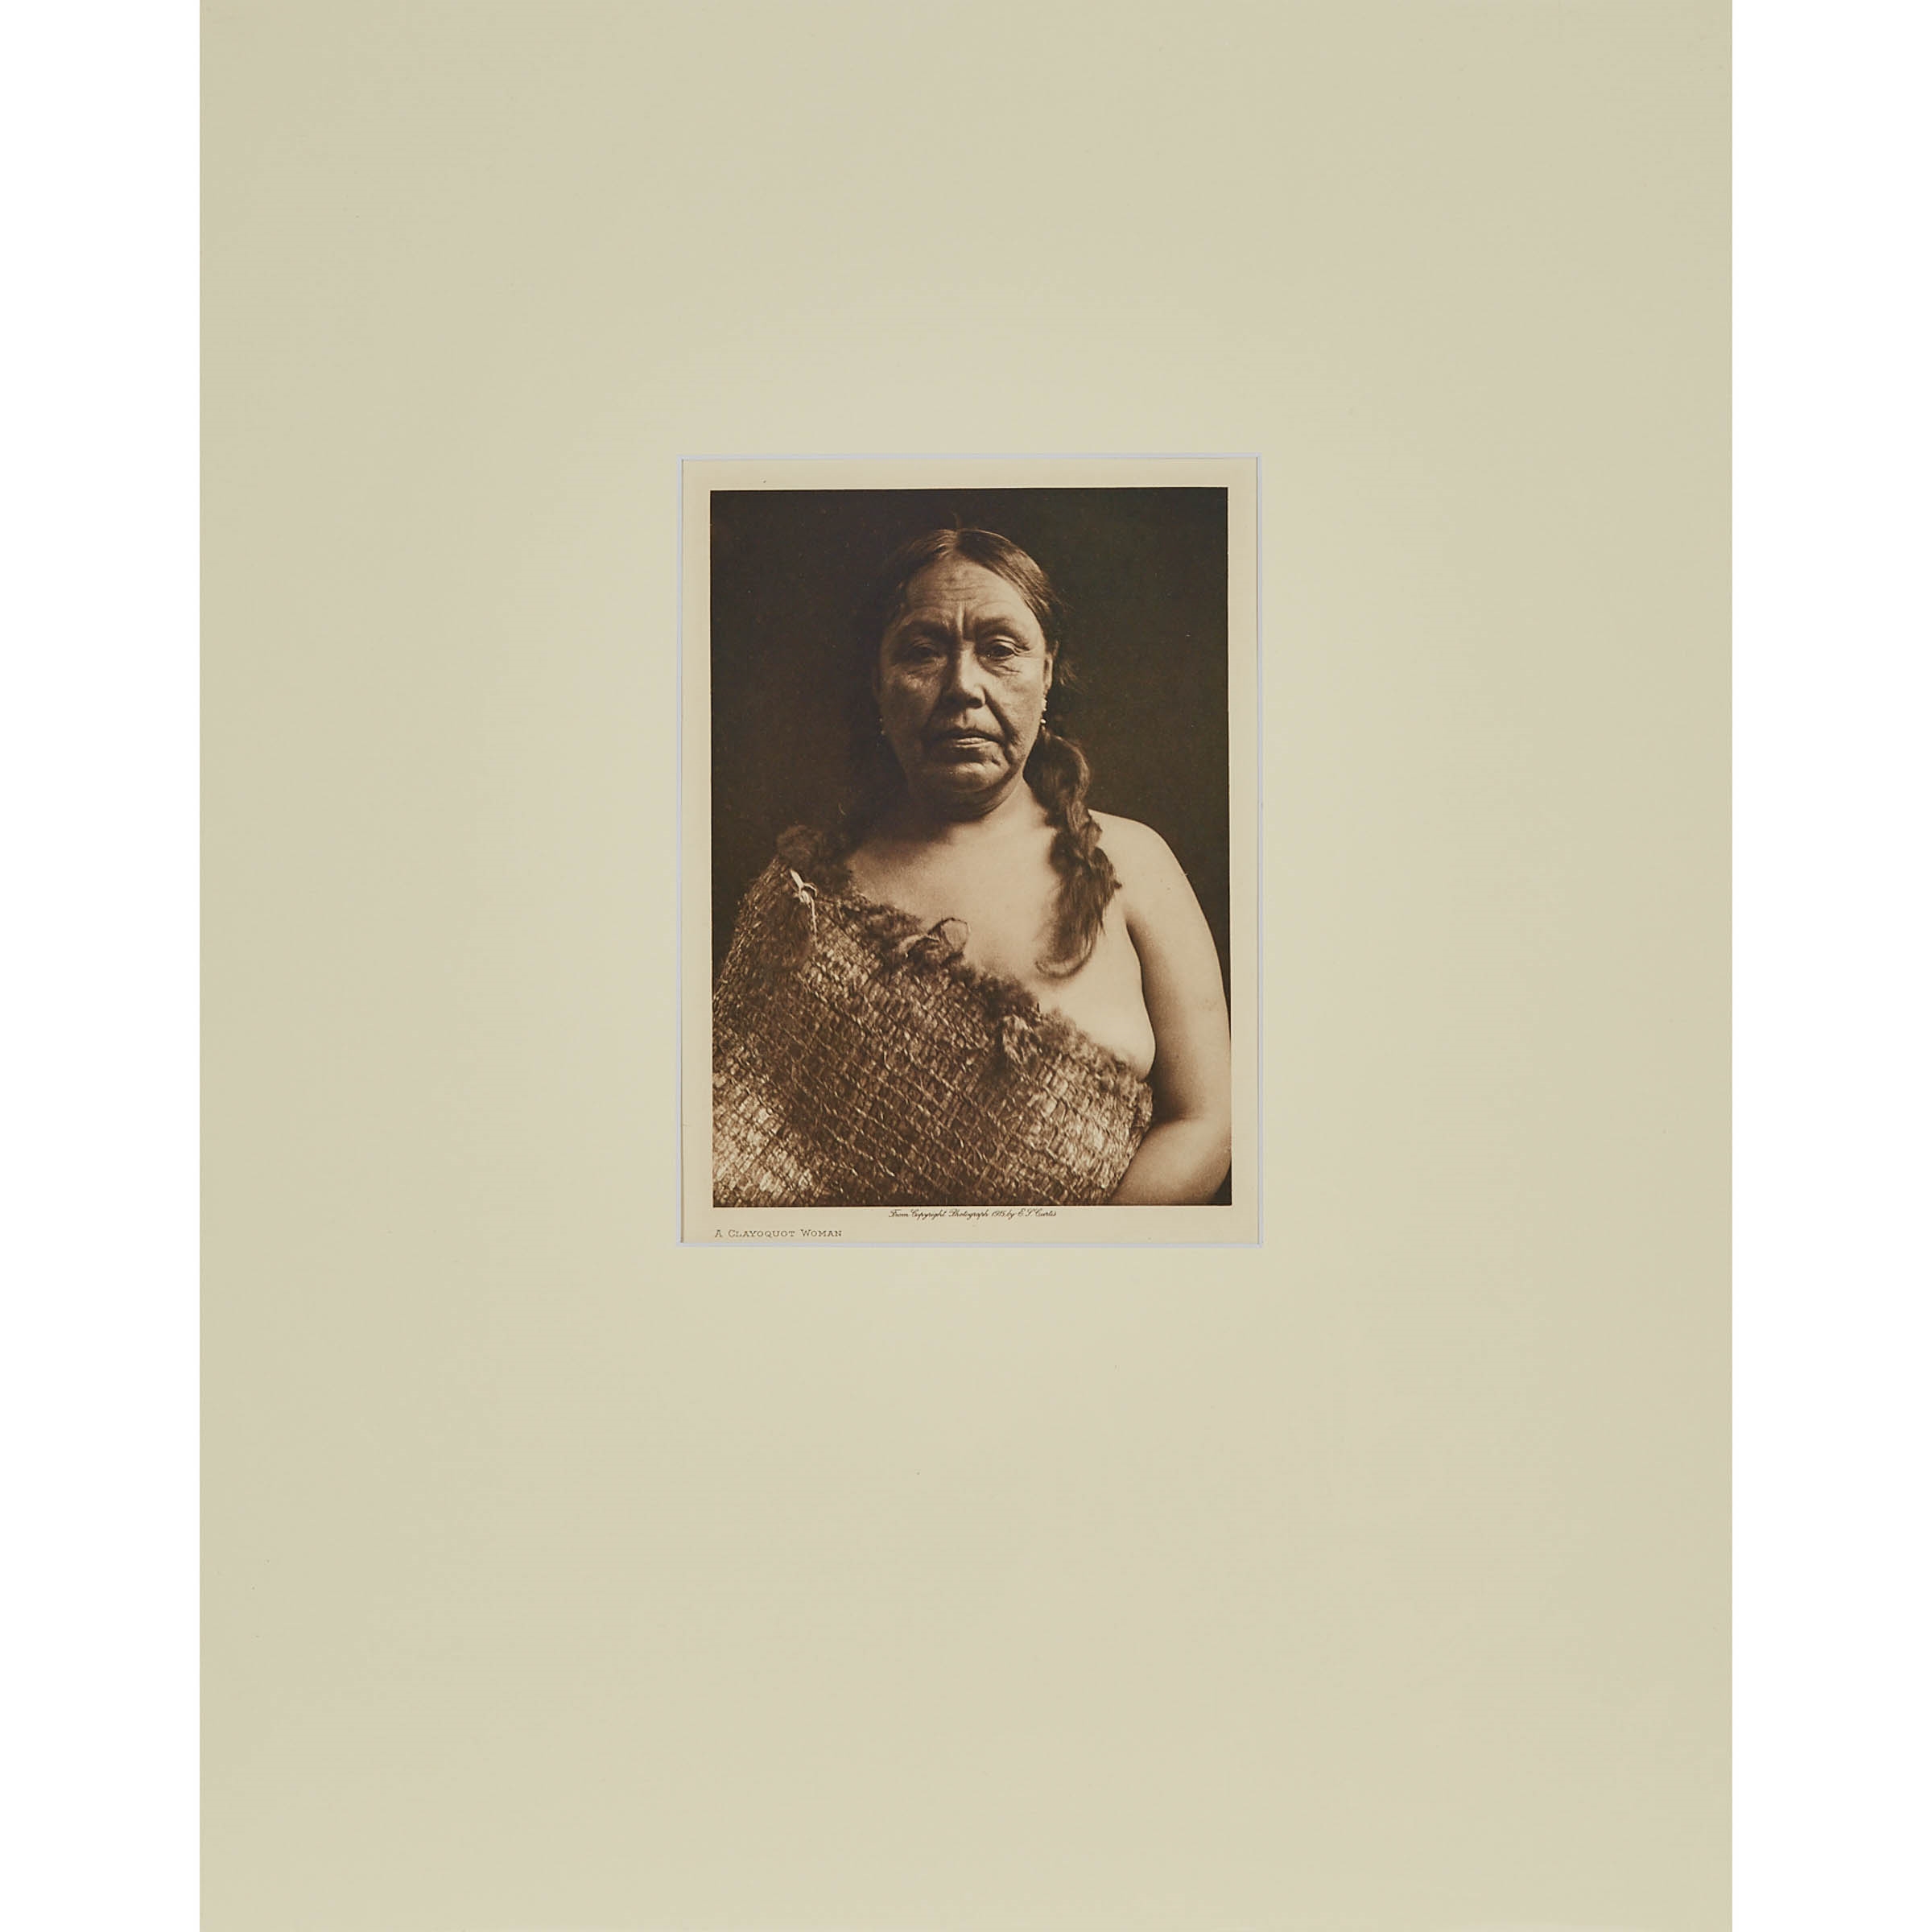 A CLAYOQUOT WOMAN, 1915; A WOMAN OF NOOTKA, 1915; EMBARKING, 1914 by Edward S. Curtis, 1915